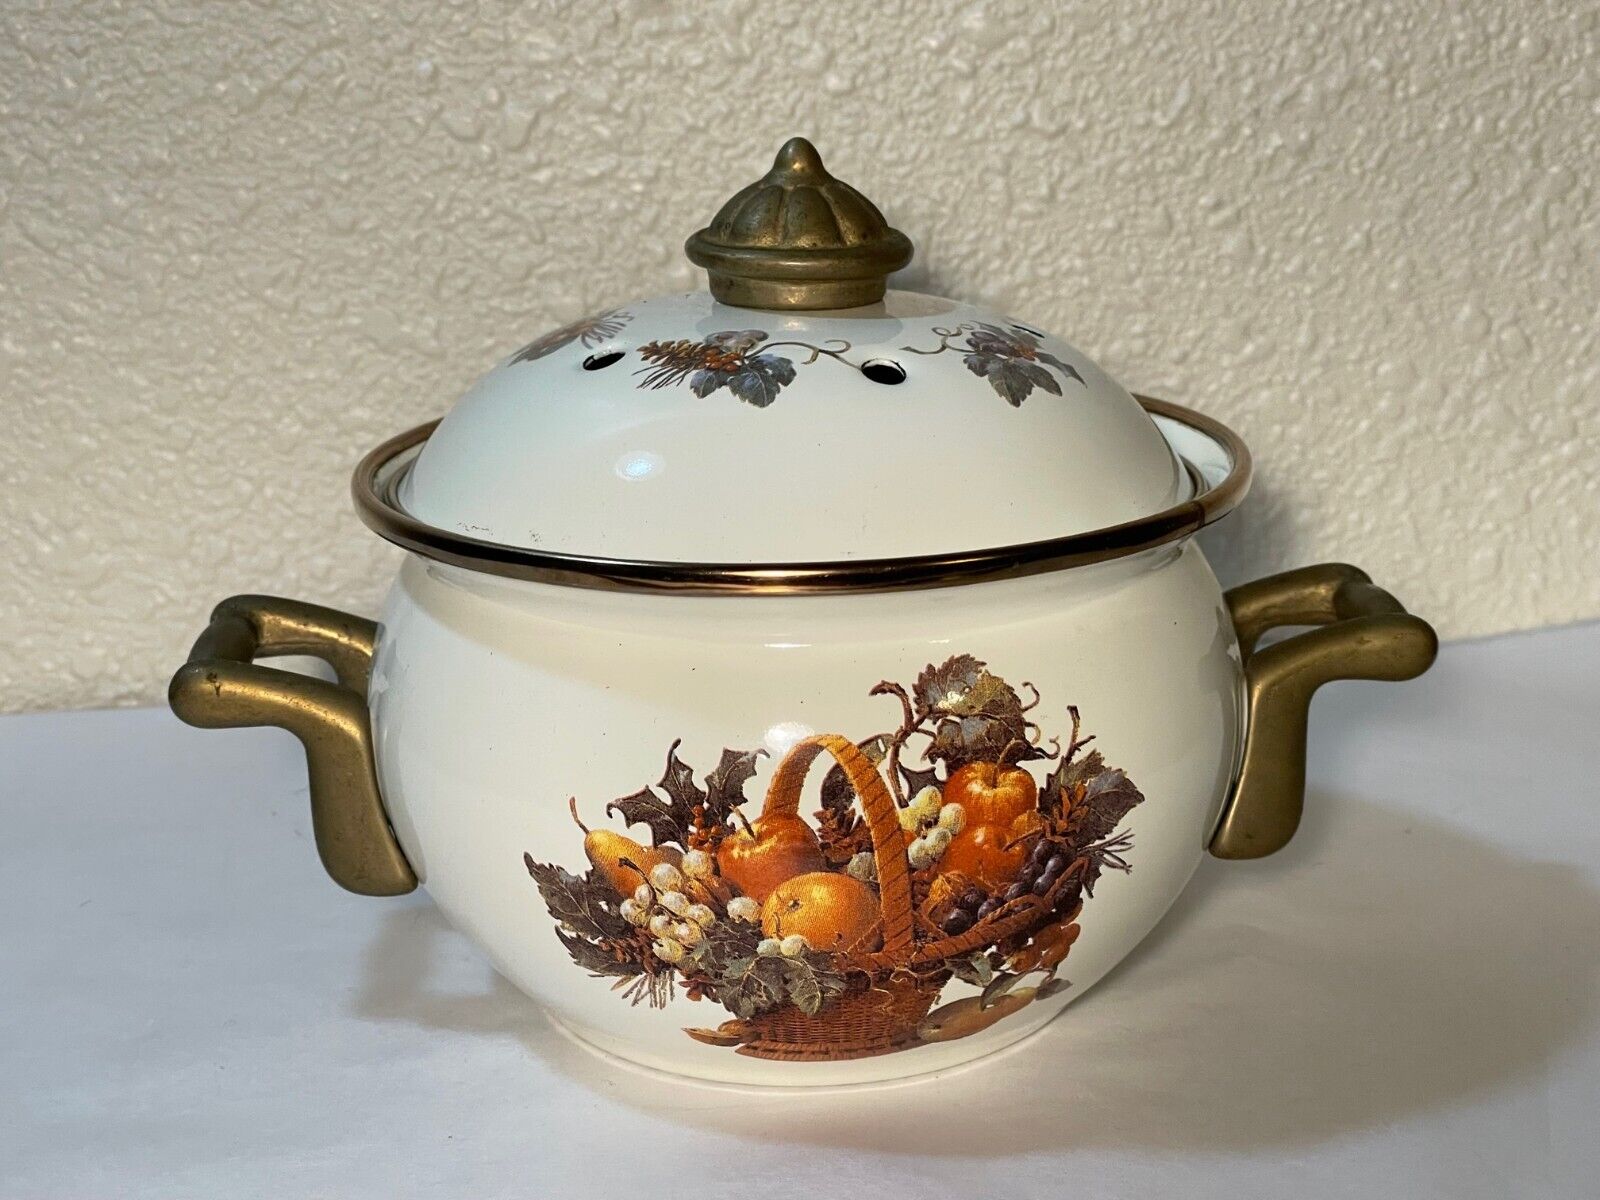 Vintage 1980s Small Enamelware Pot, Vented Lid, Harvest Pattern, Made in Taiwan